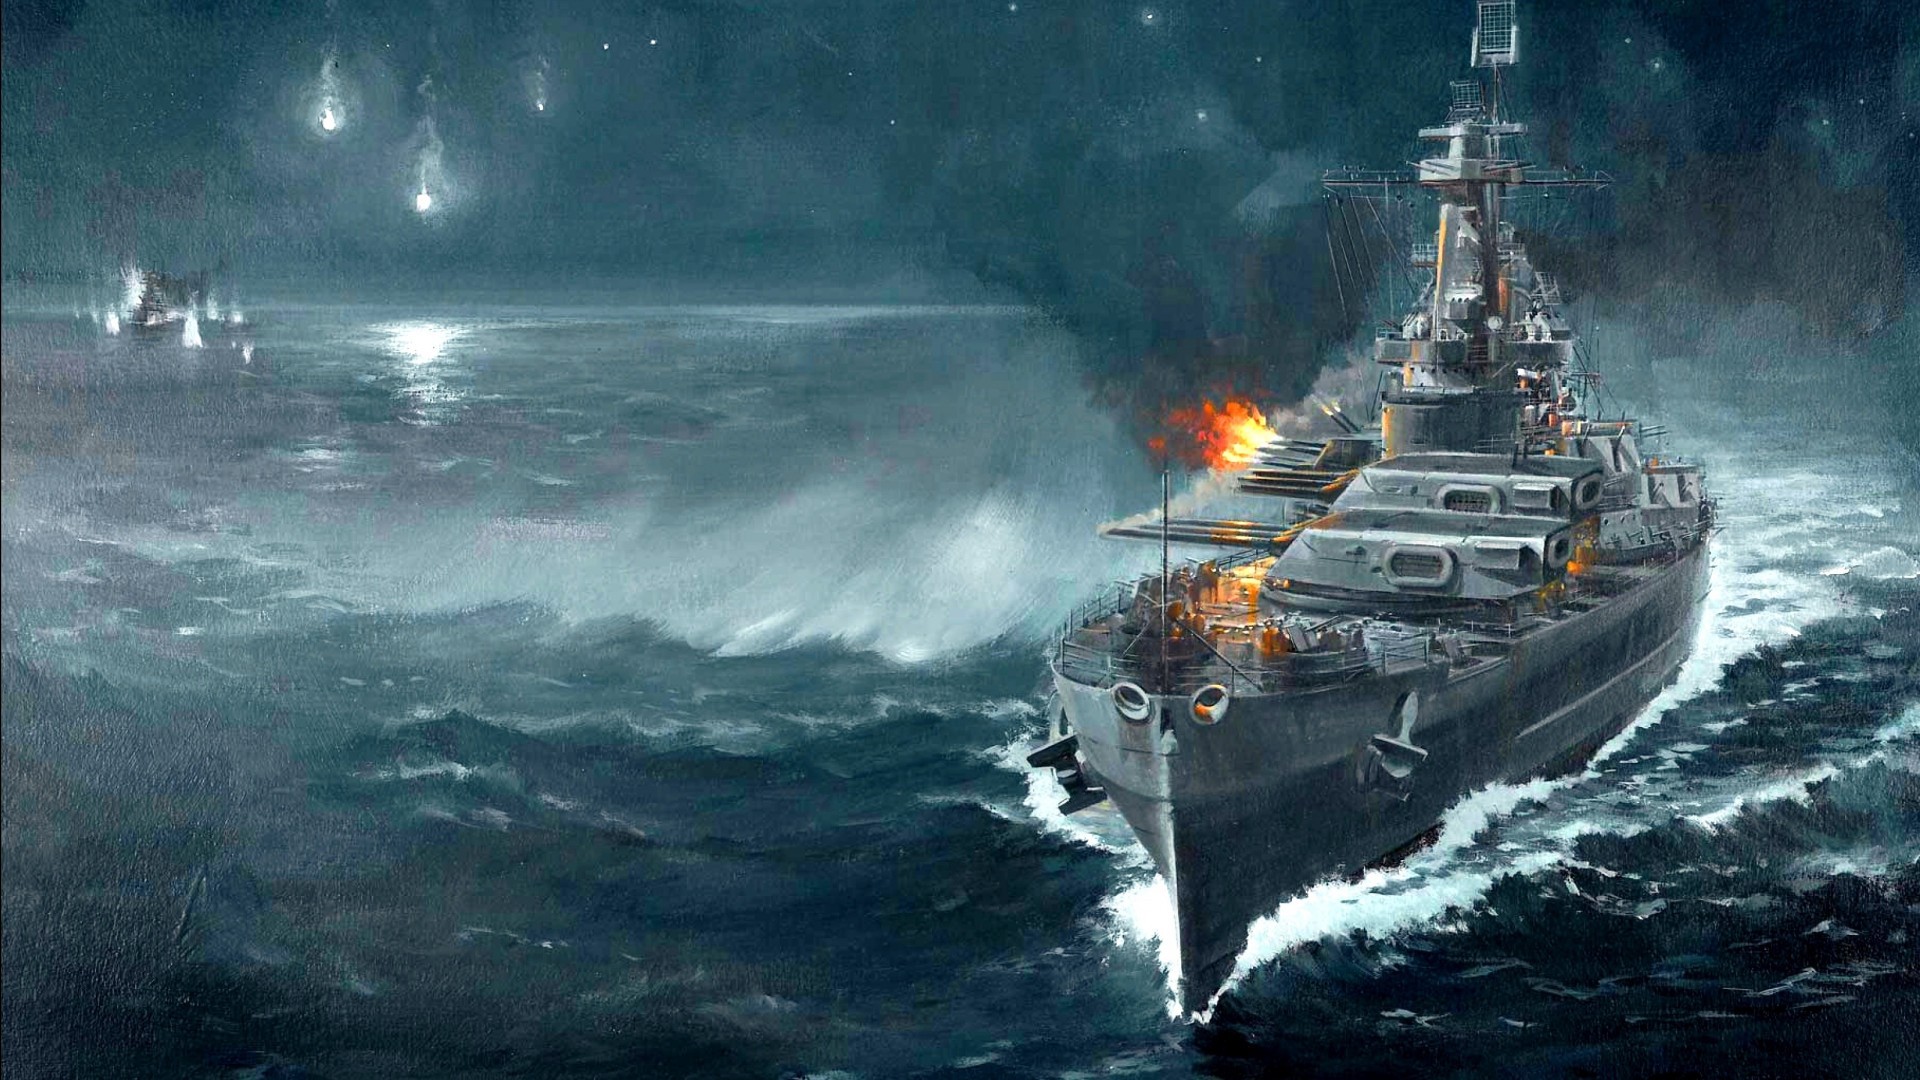 Night Sea Battle Wallpaper And Image Pictures Photos